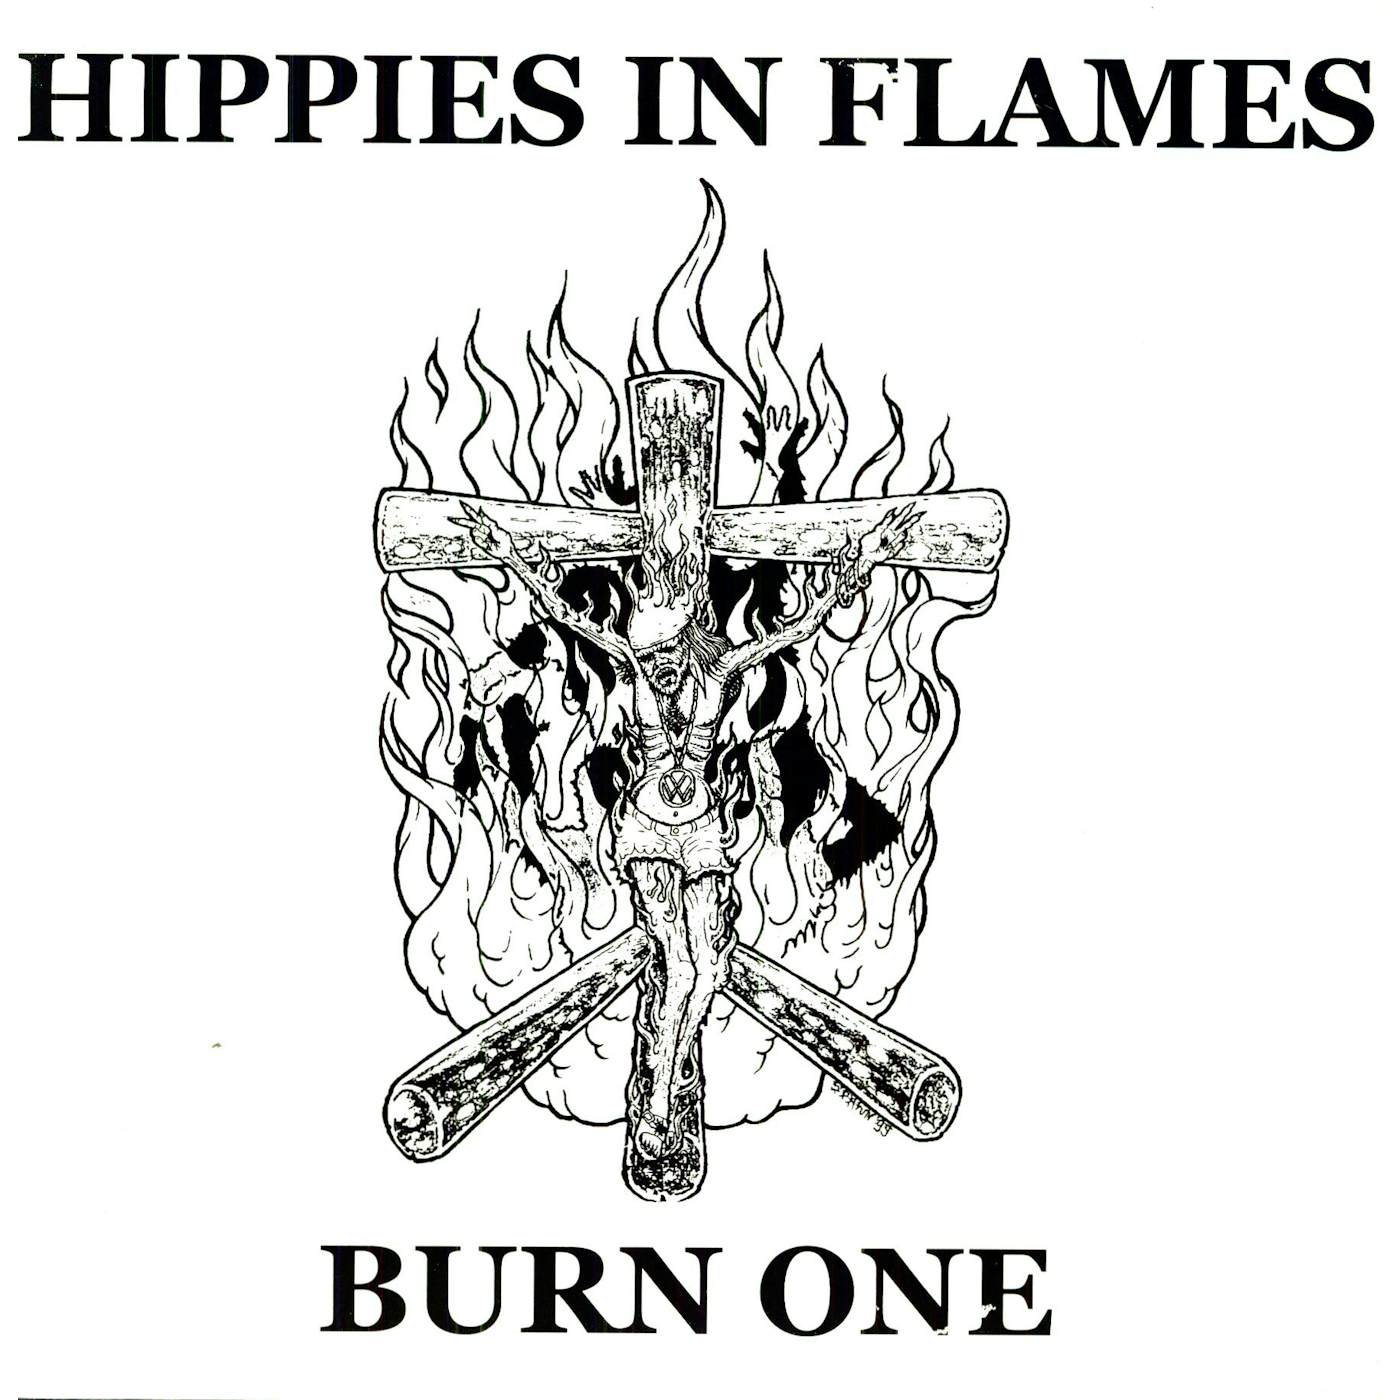 Hippies In Flames BURN ONE Vinyl Record